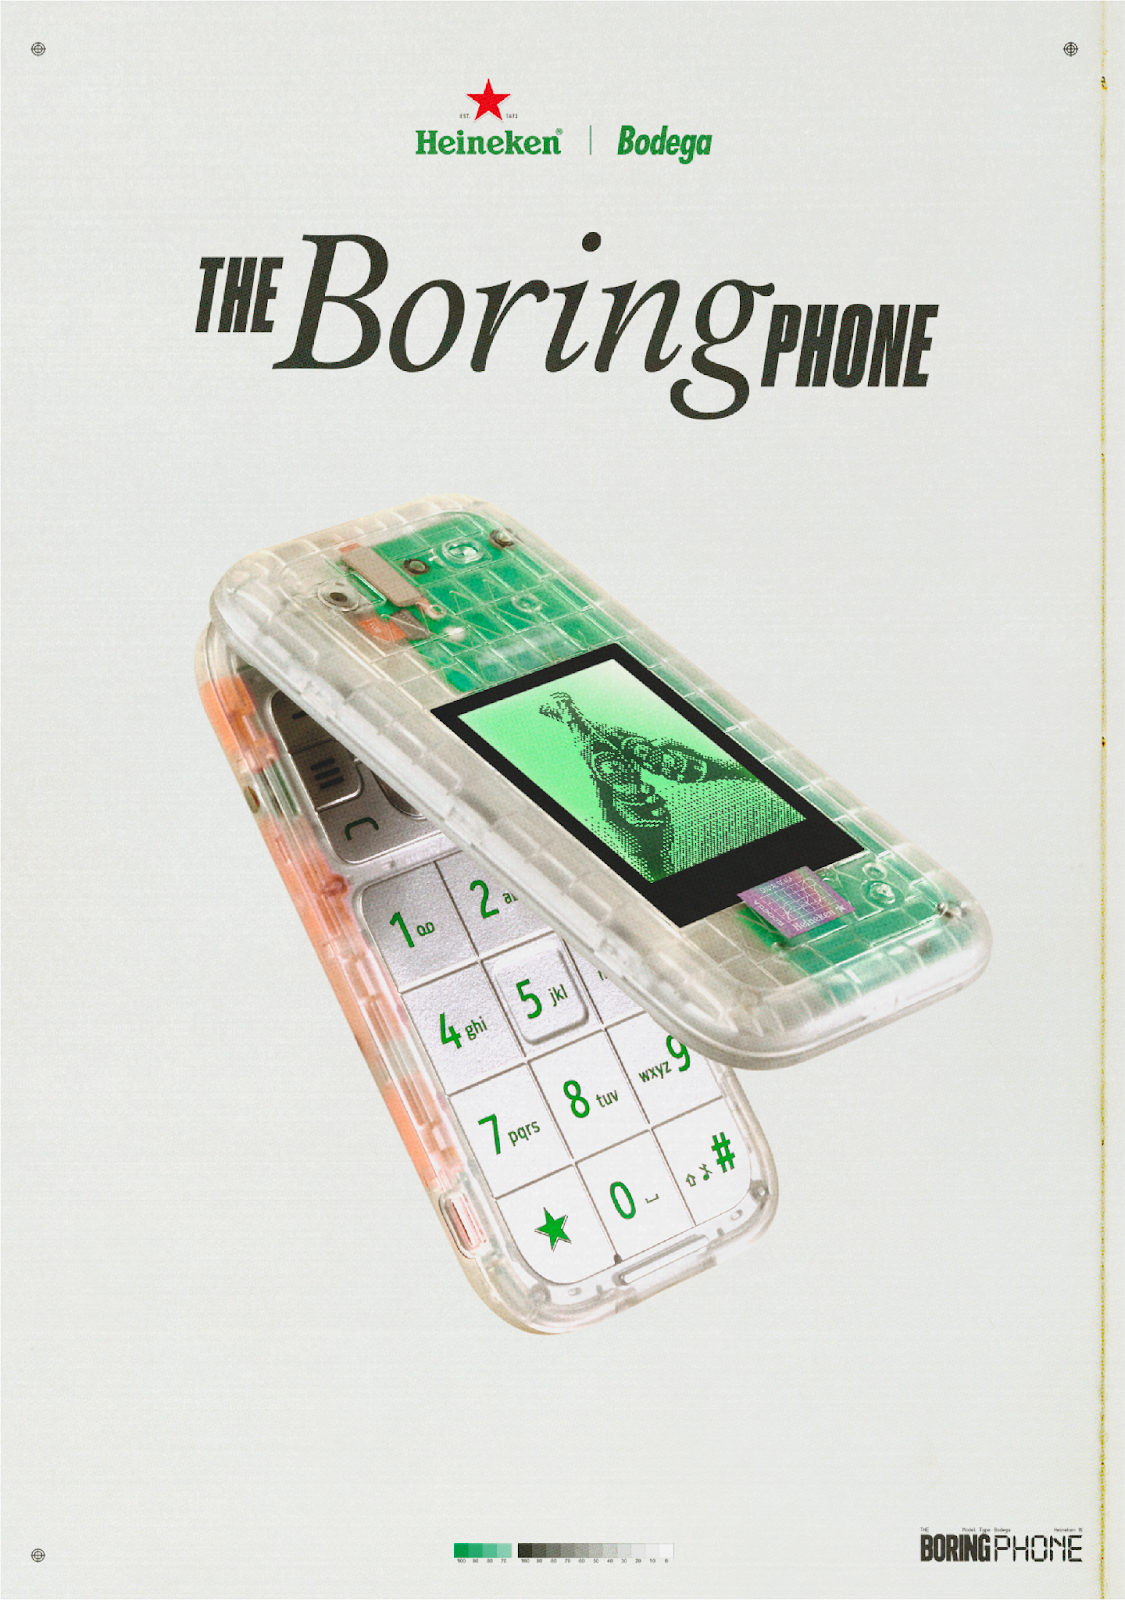 Heineken® and Bodega have launched ‘The Boring Phone ', to help people discover there is more to their social life when there is less on their phone 